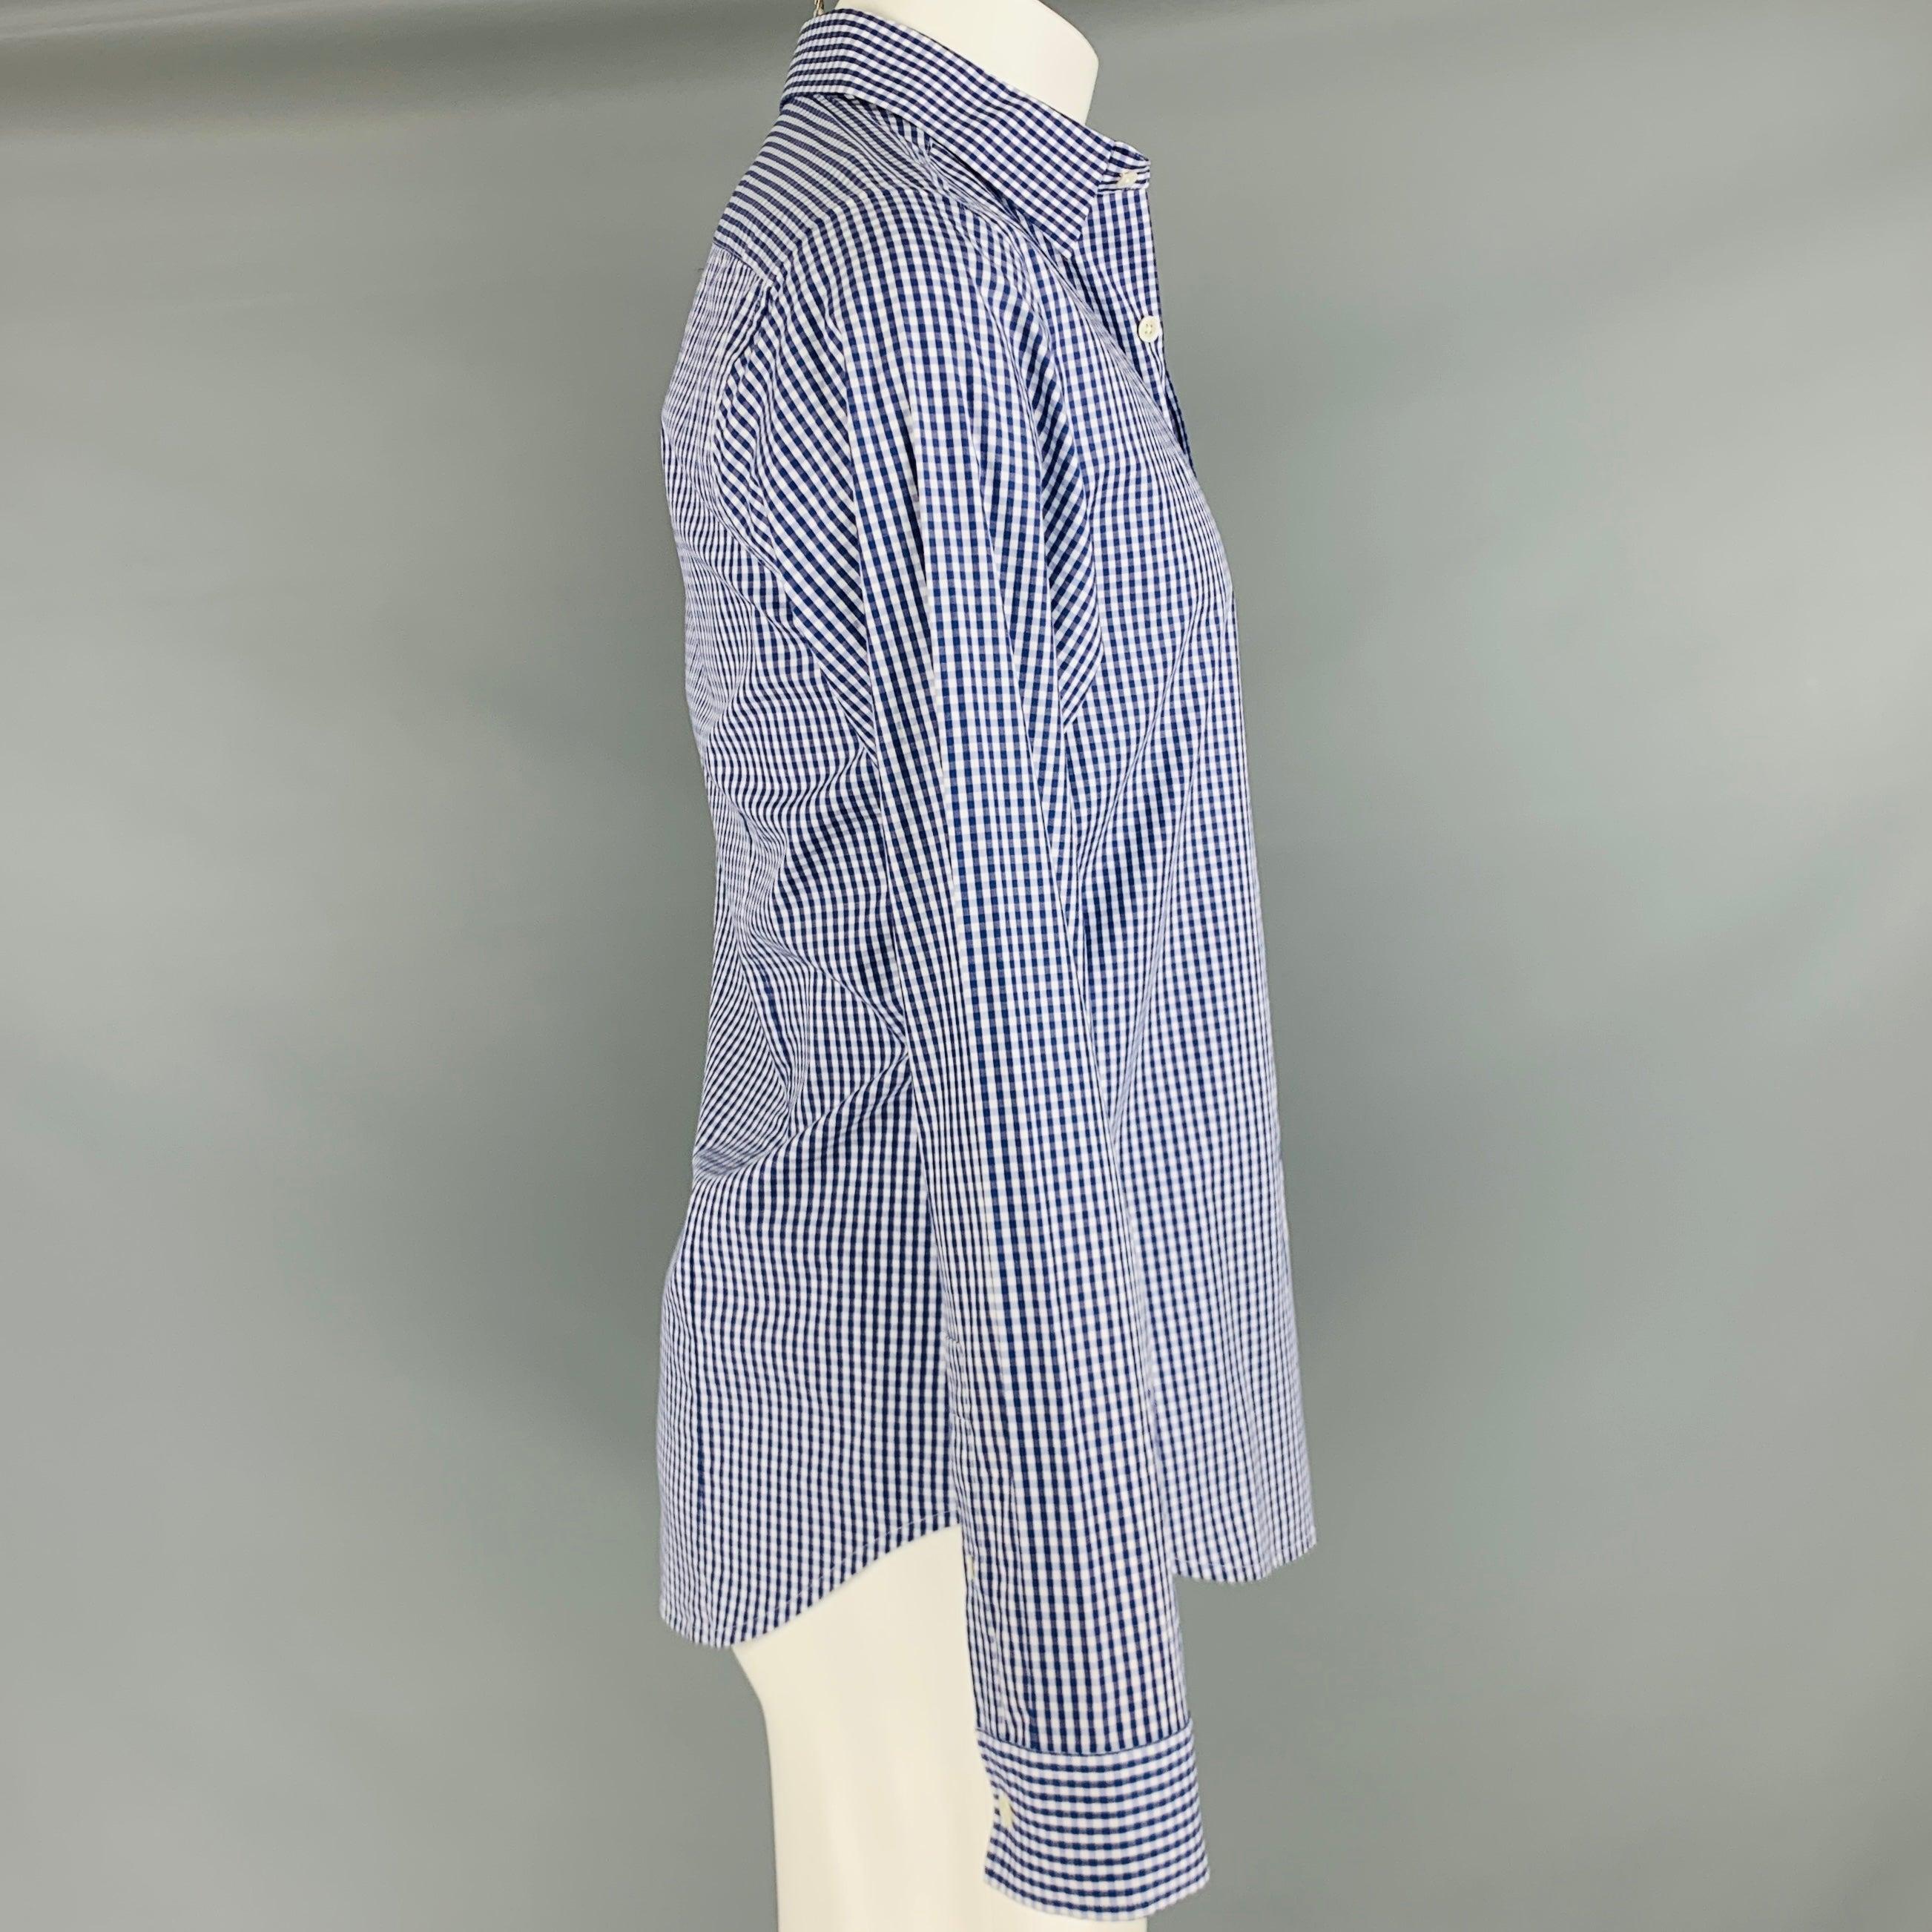 THEORY long sleeve shirt
in a navy and white cotton fabric featuring checkered pattern, spread collar, and button closure. New with Tags. 

Marked:   S 

Measurements: 
 
Shoulder: 15.5 inches Chest: 40 inches Sleeve: 25.5 inches Length: 29 inches 
